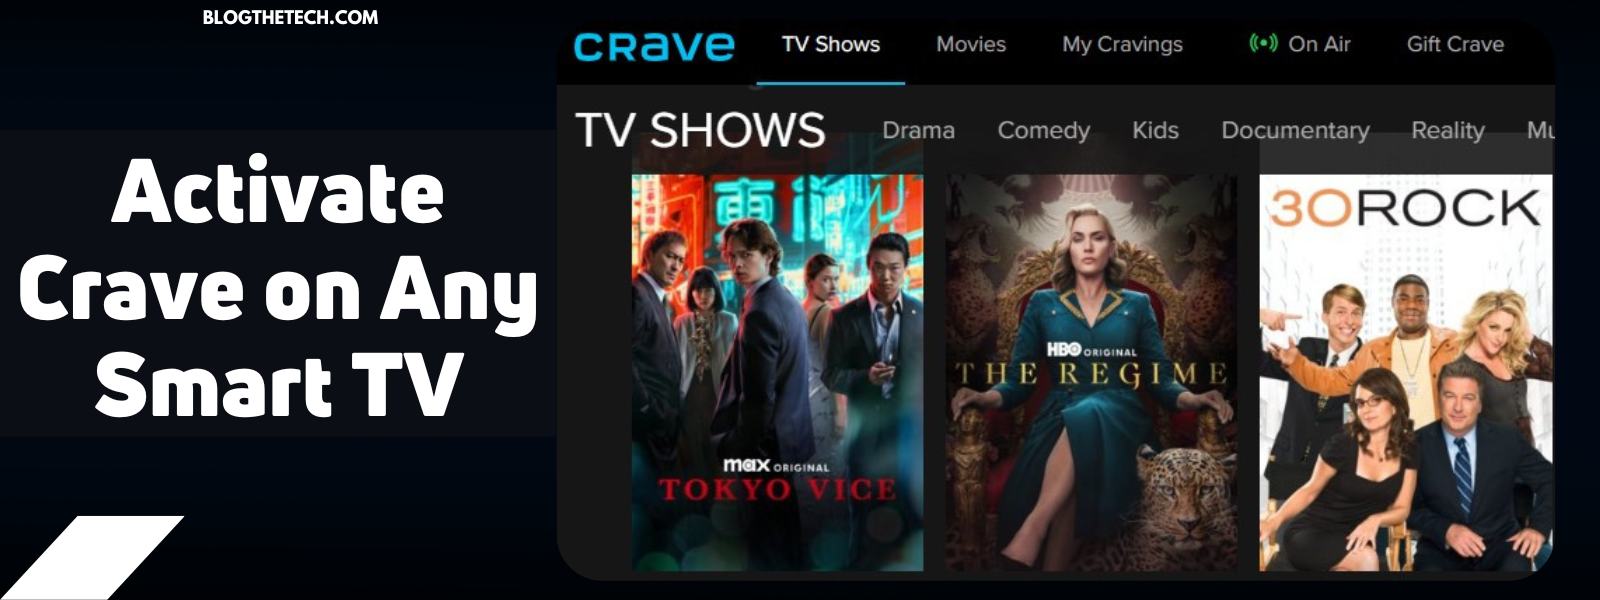 activate-crave-on-any-smart-tv-featured